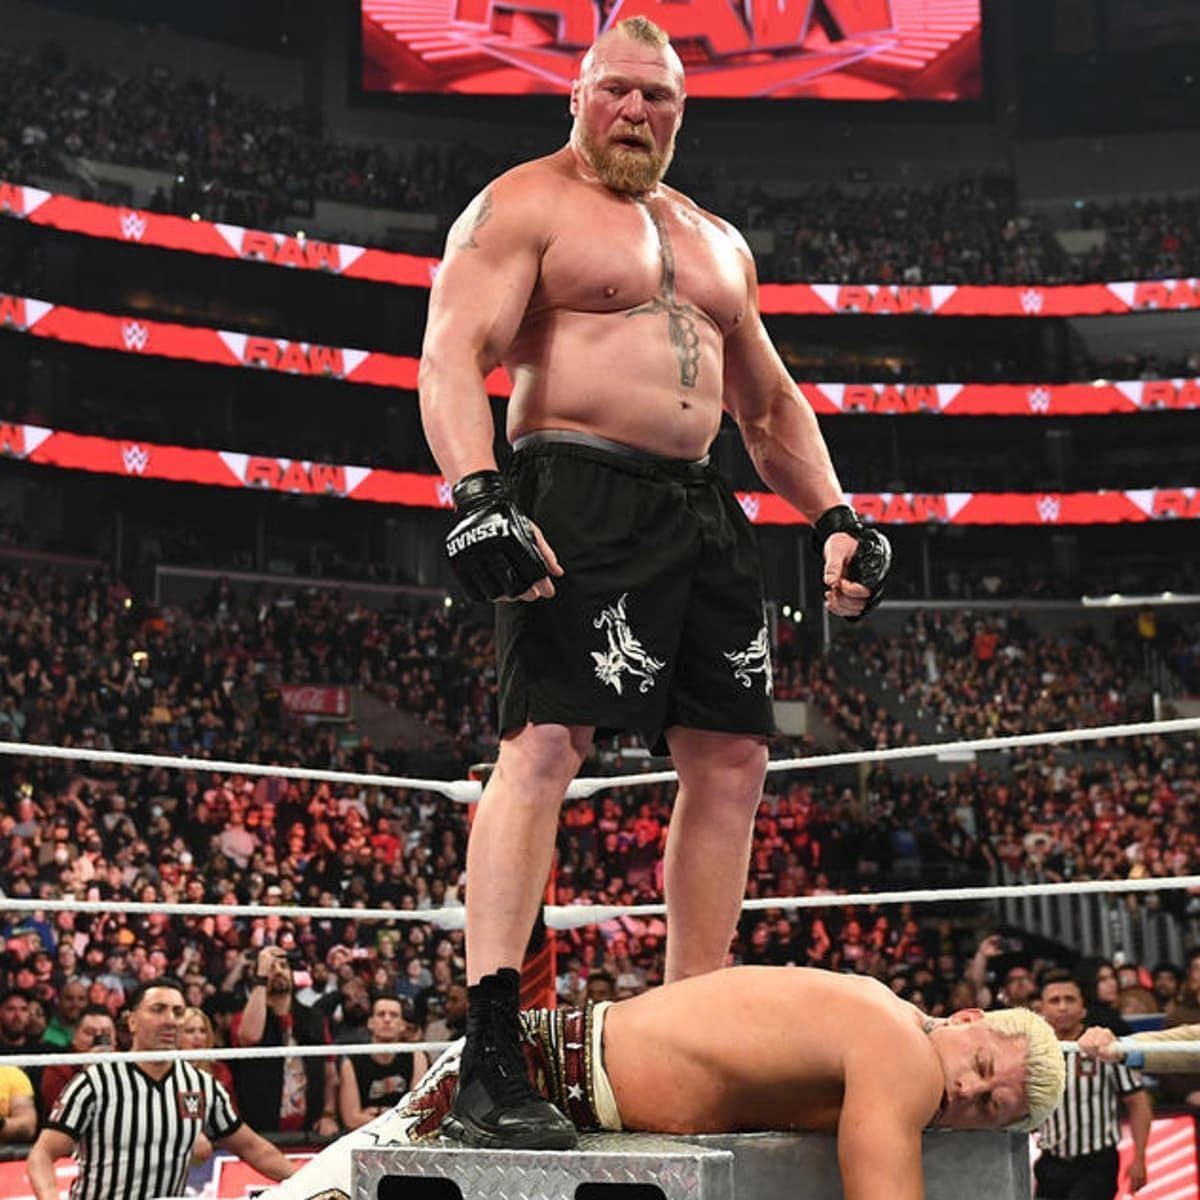 Brock Lesnar would want to leave Cody Rhodes lying again in an Unsanctioned Match.